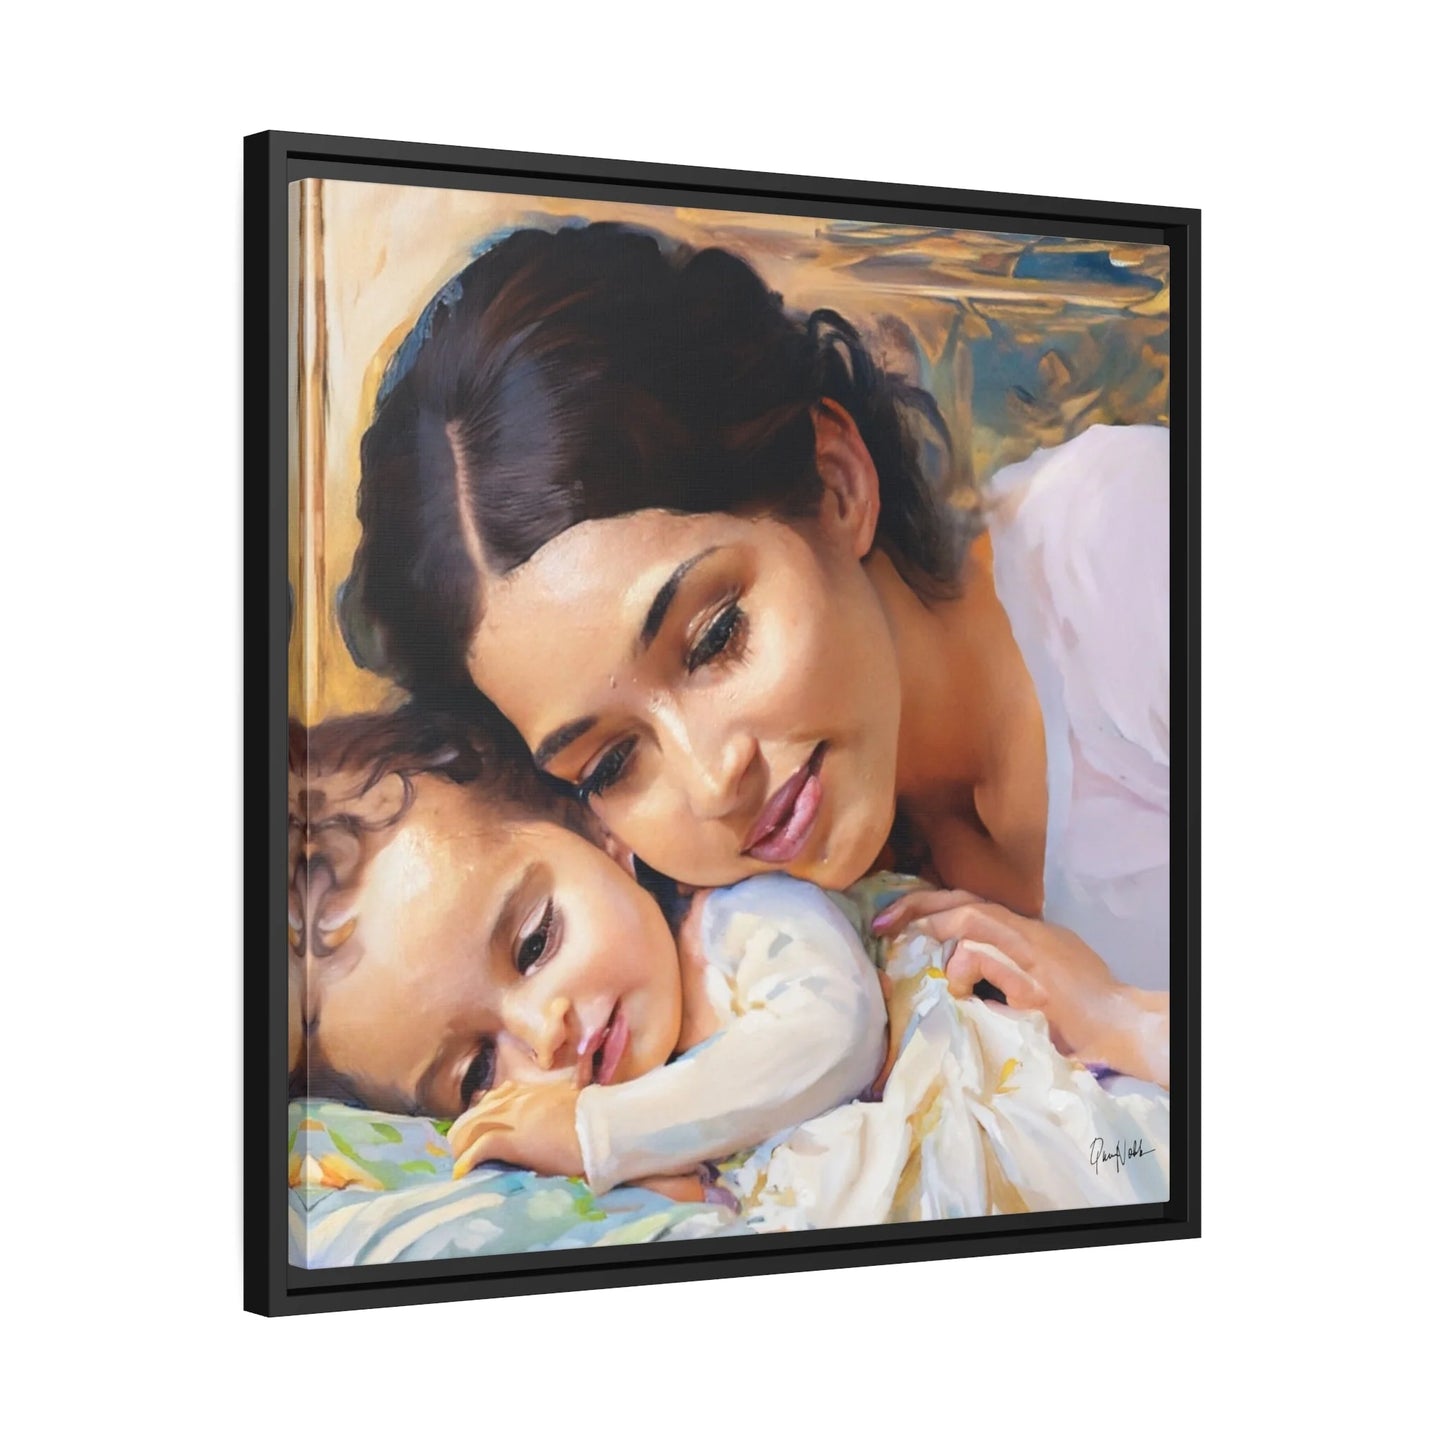 Framed Canvas Wall Art MOTHER and BABY - by Queennoble